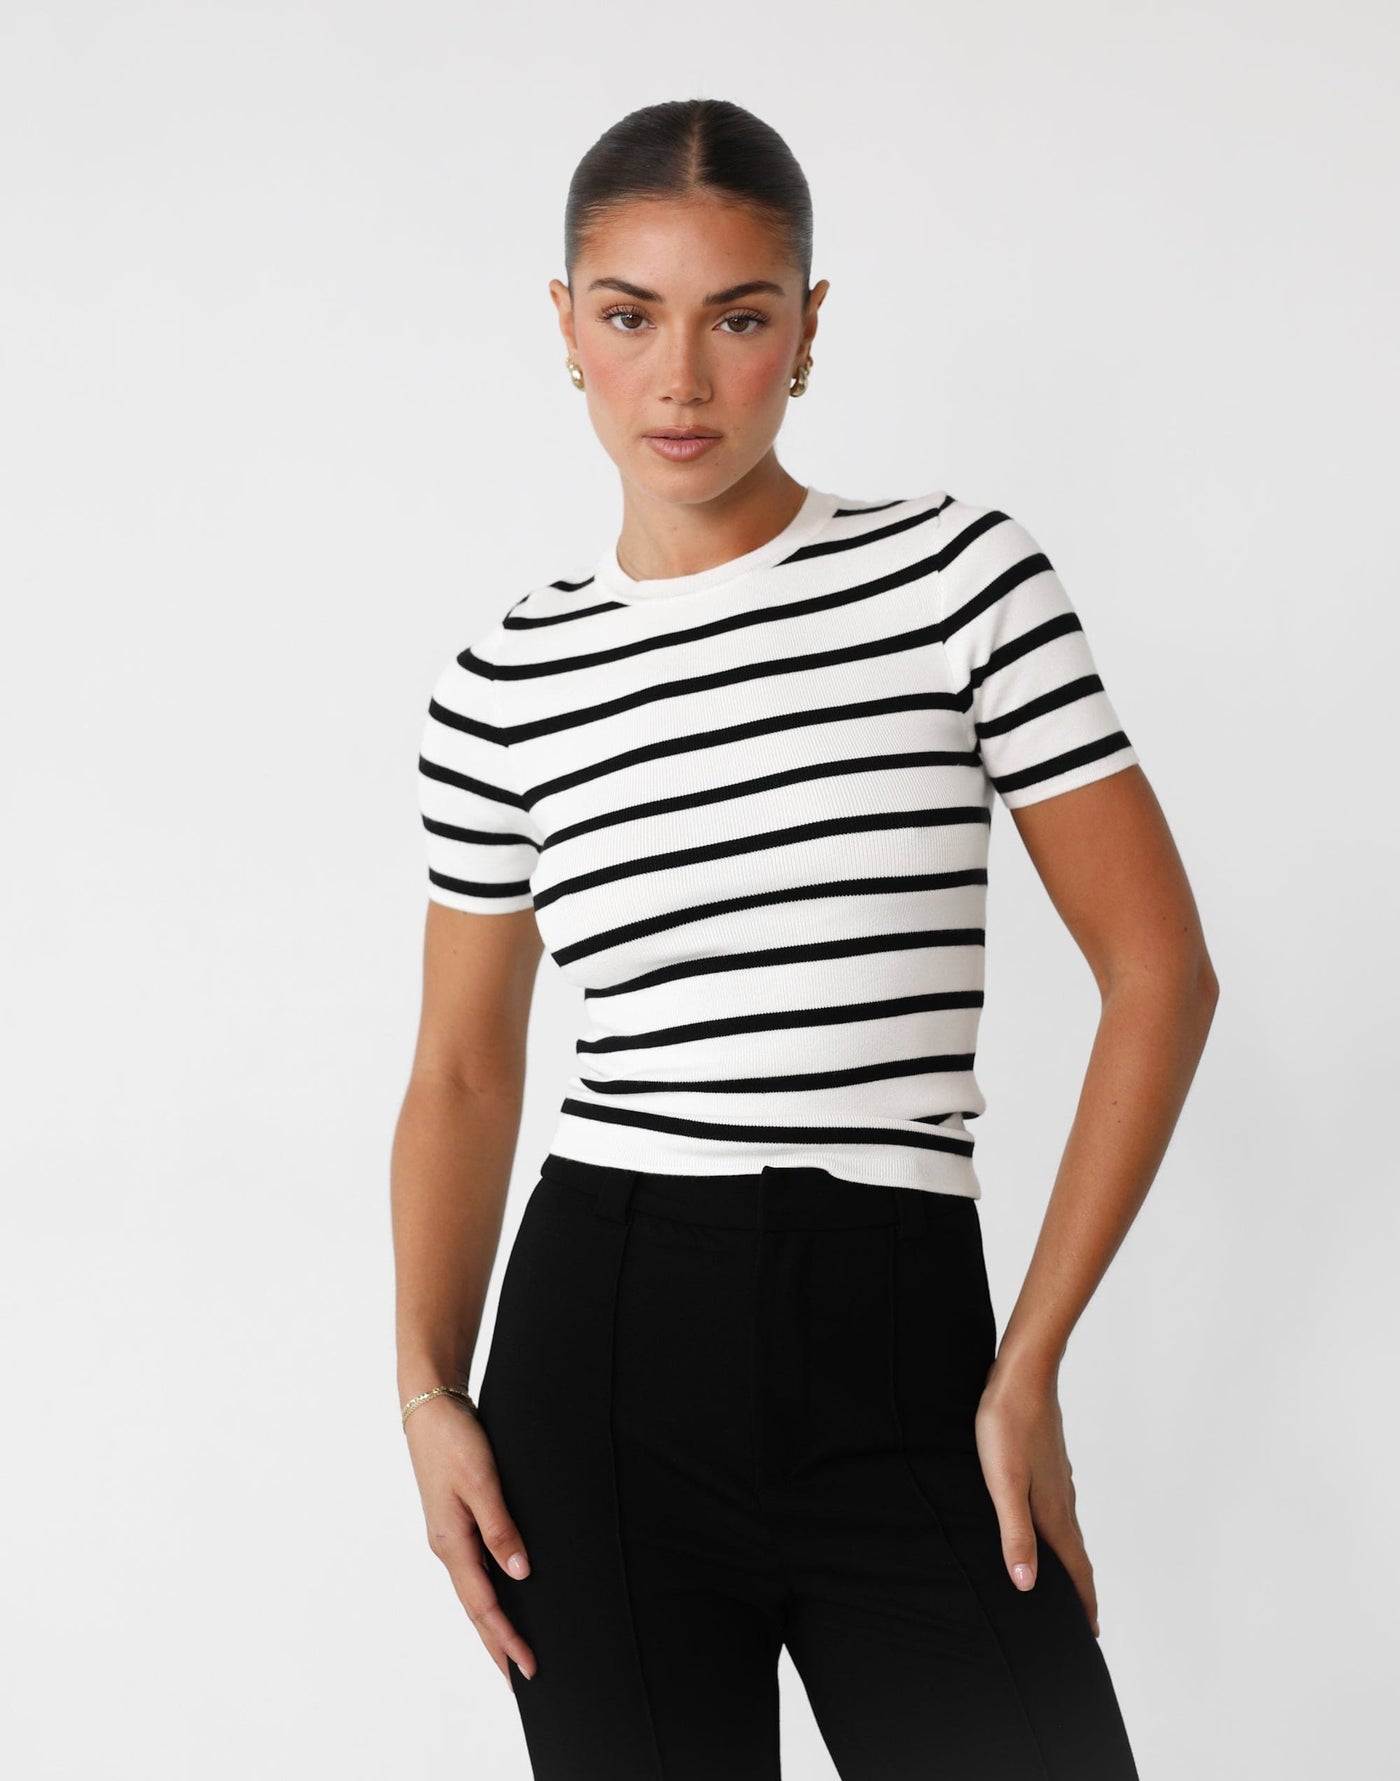 Alivina Top (Black/White) - Striped Knit Rounded Neckline Top - Women's Top - Charcoal Clothing